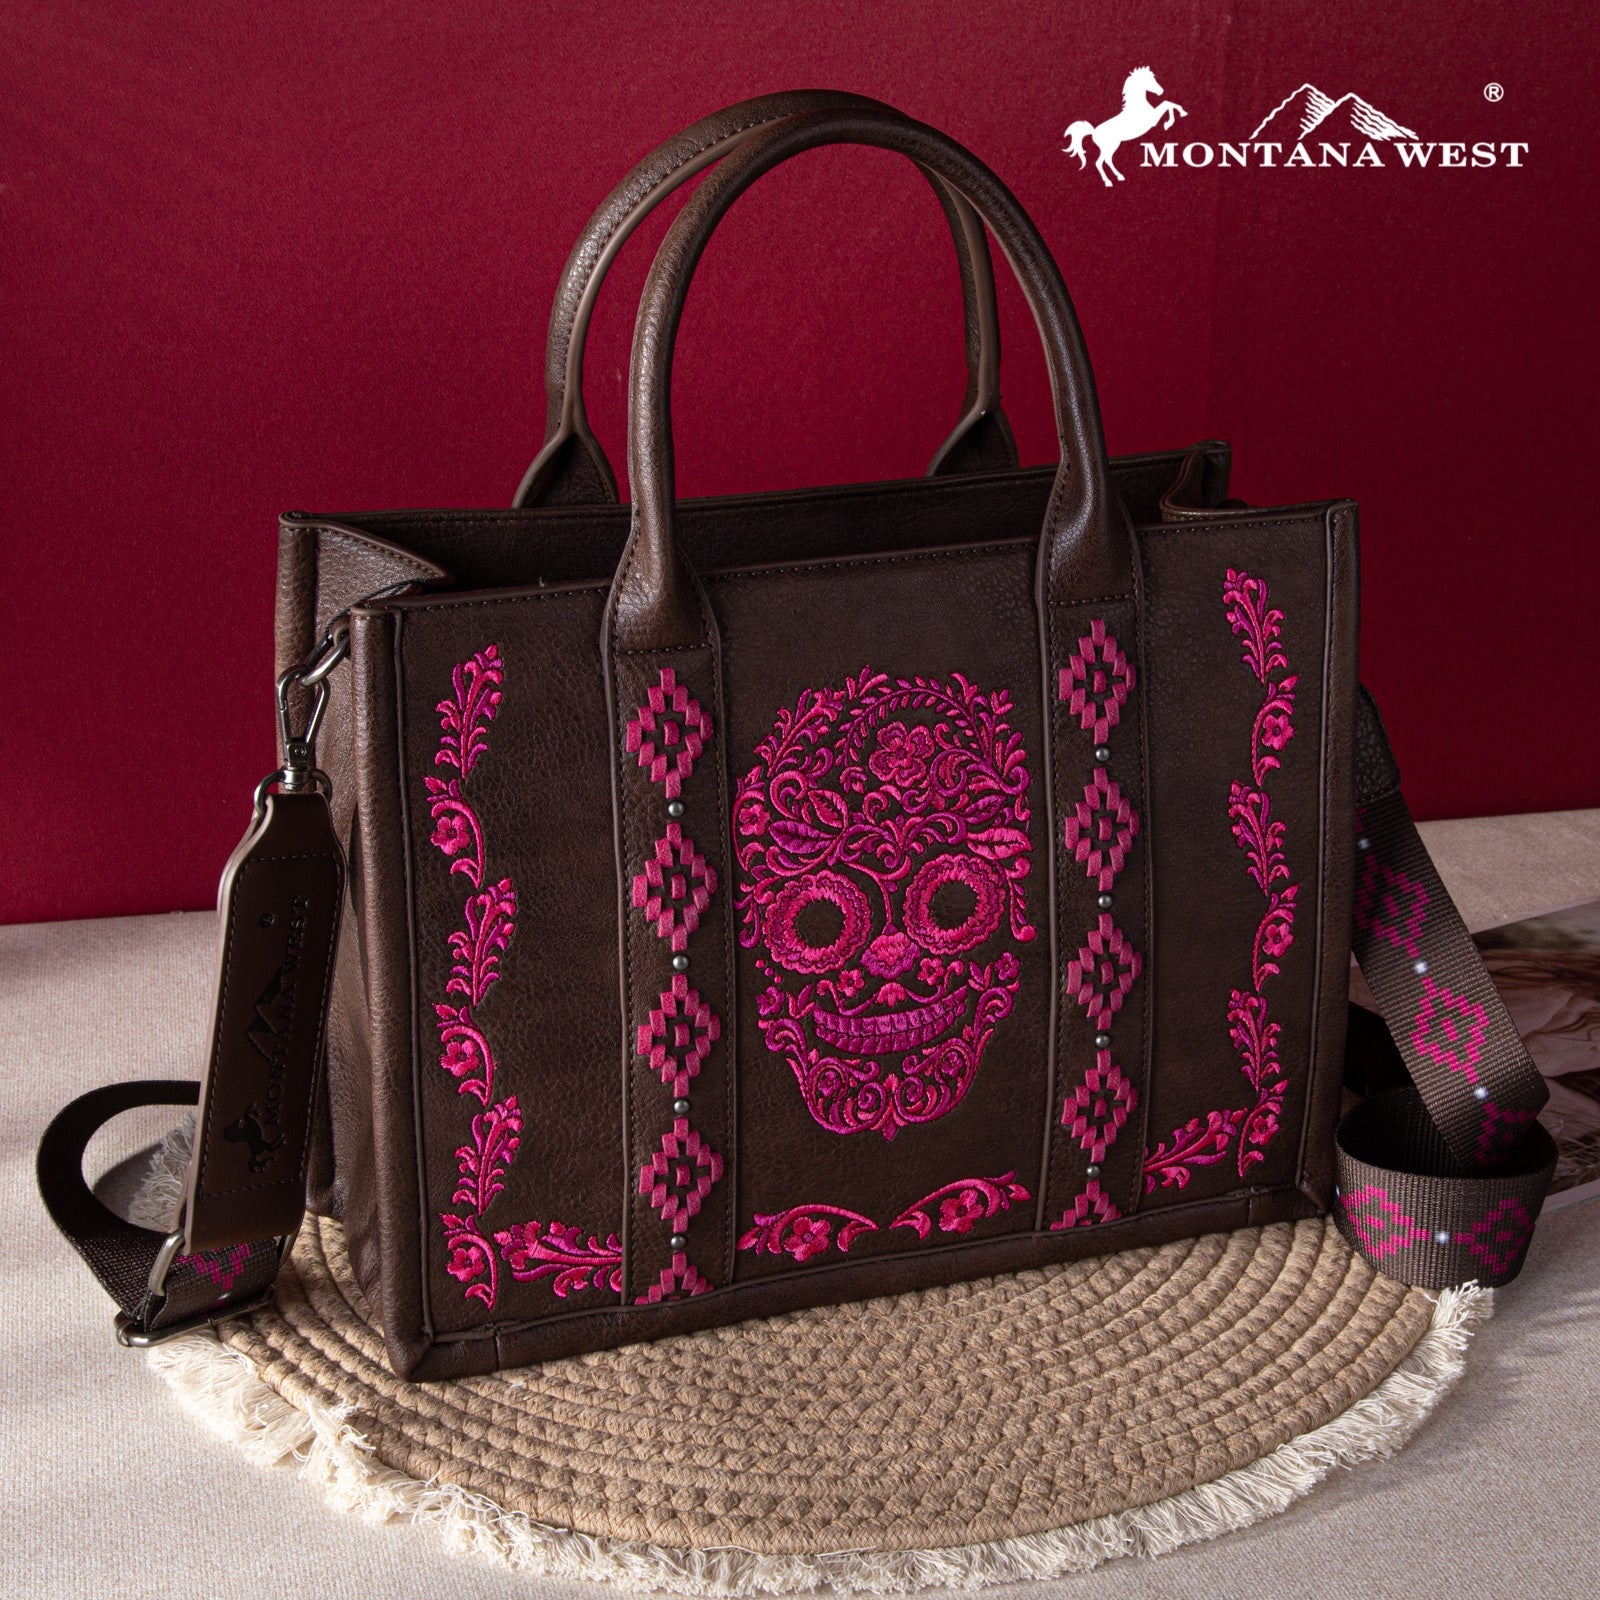 Montana West Embroidered Sugar Skull Tote Bag - Montana West World